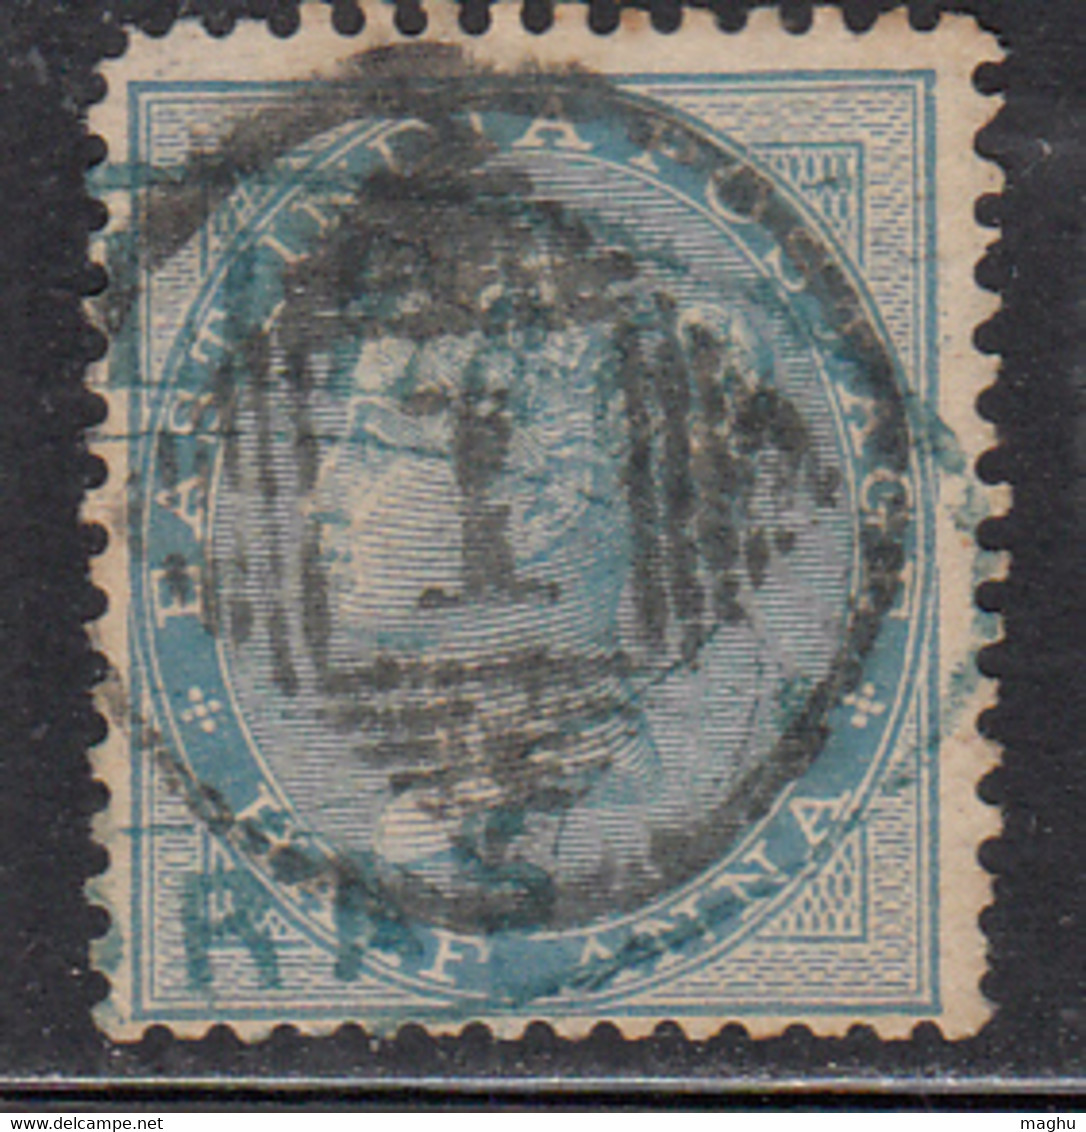 '1' Madras Distict, Madras Circle/ Cooper / Renouf Type 9a, British East India Used, Early Indian Cancellations - 1854 Compagnie Des Indes